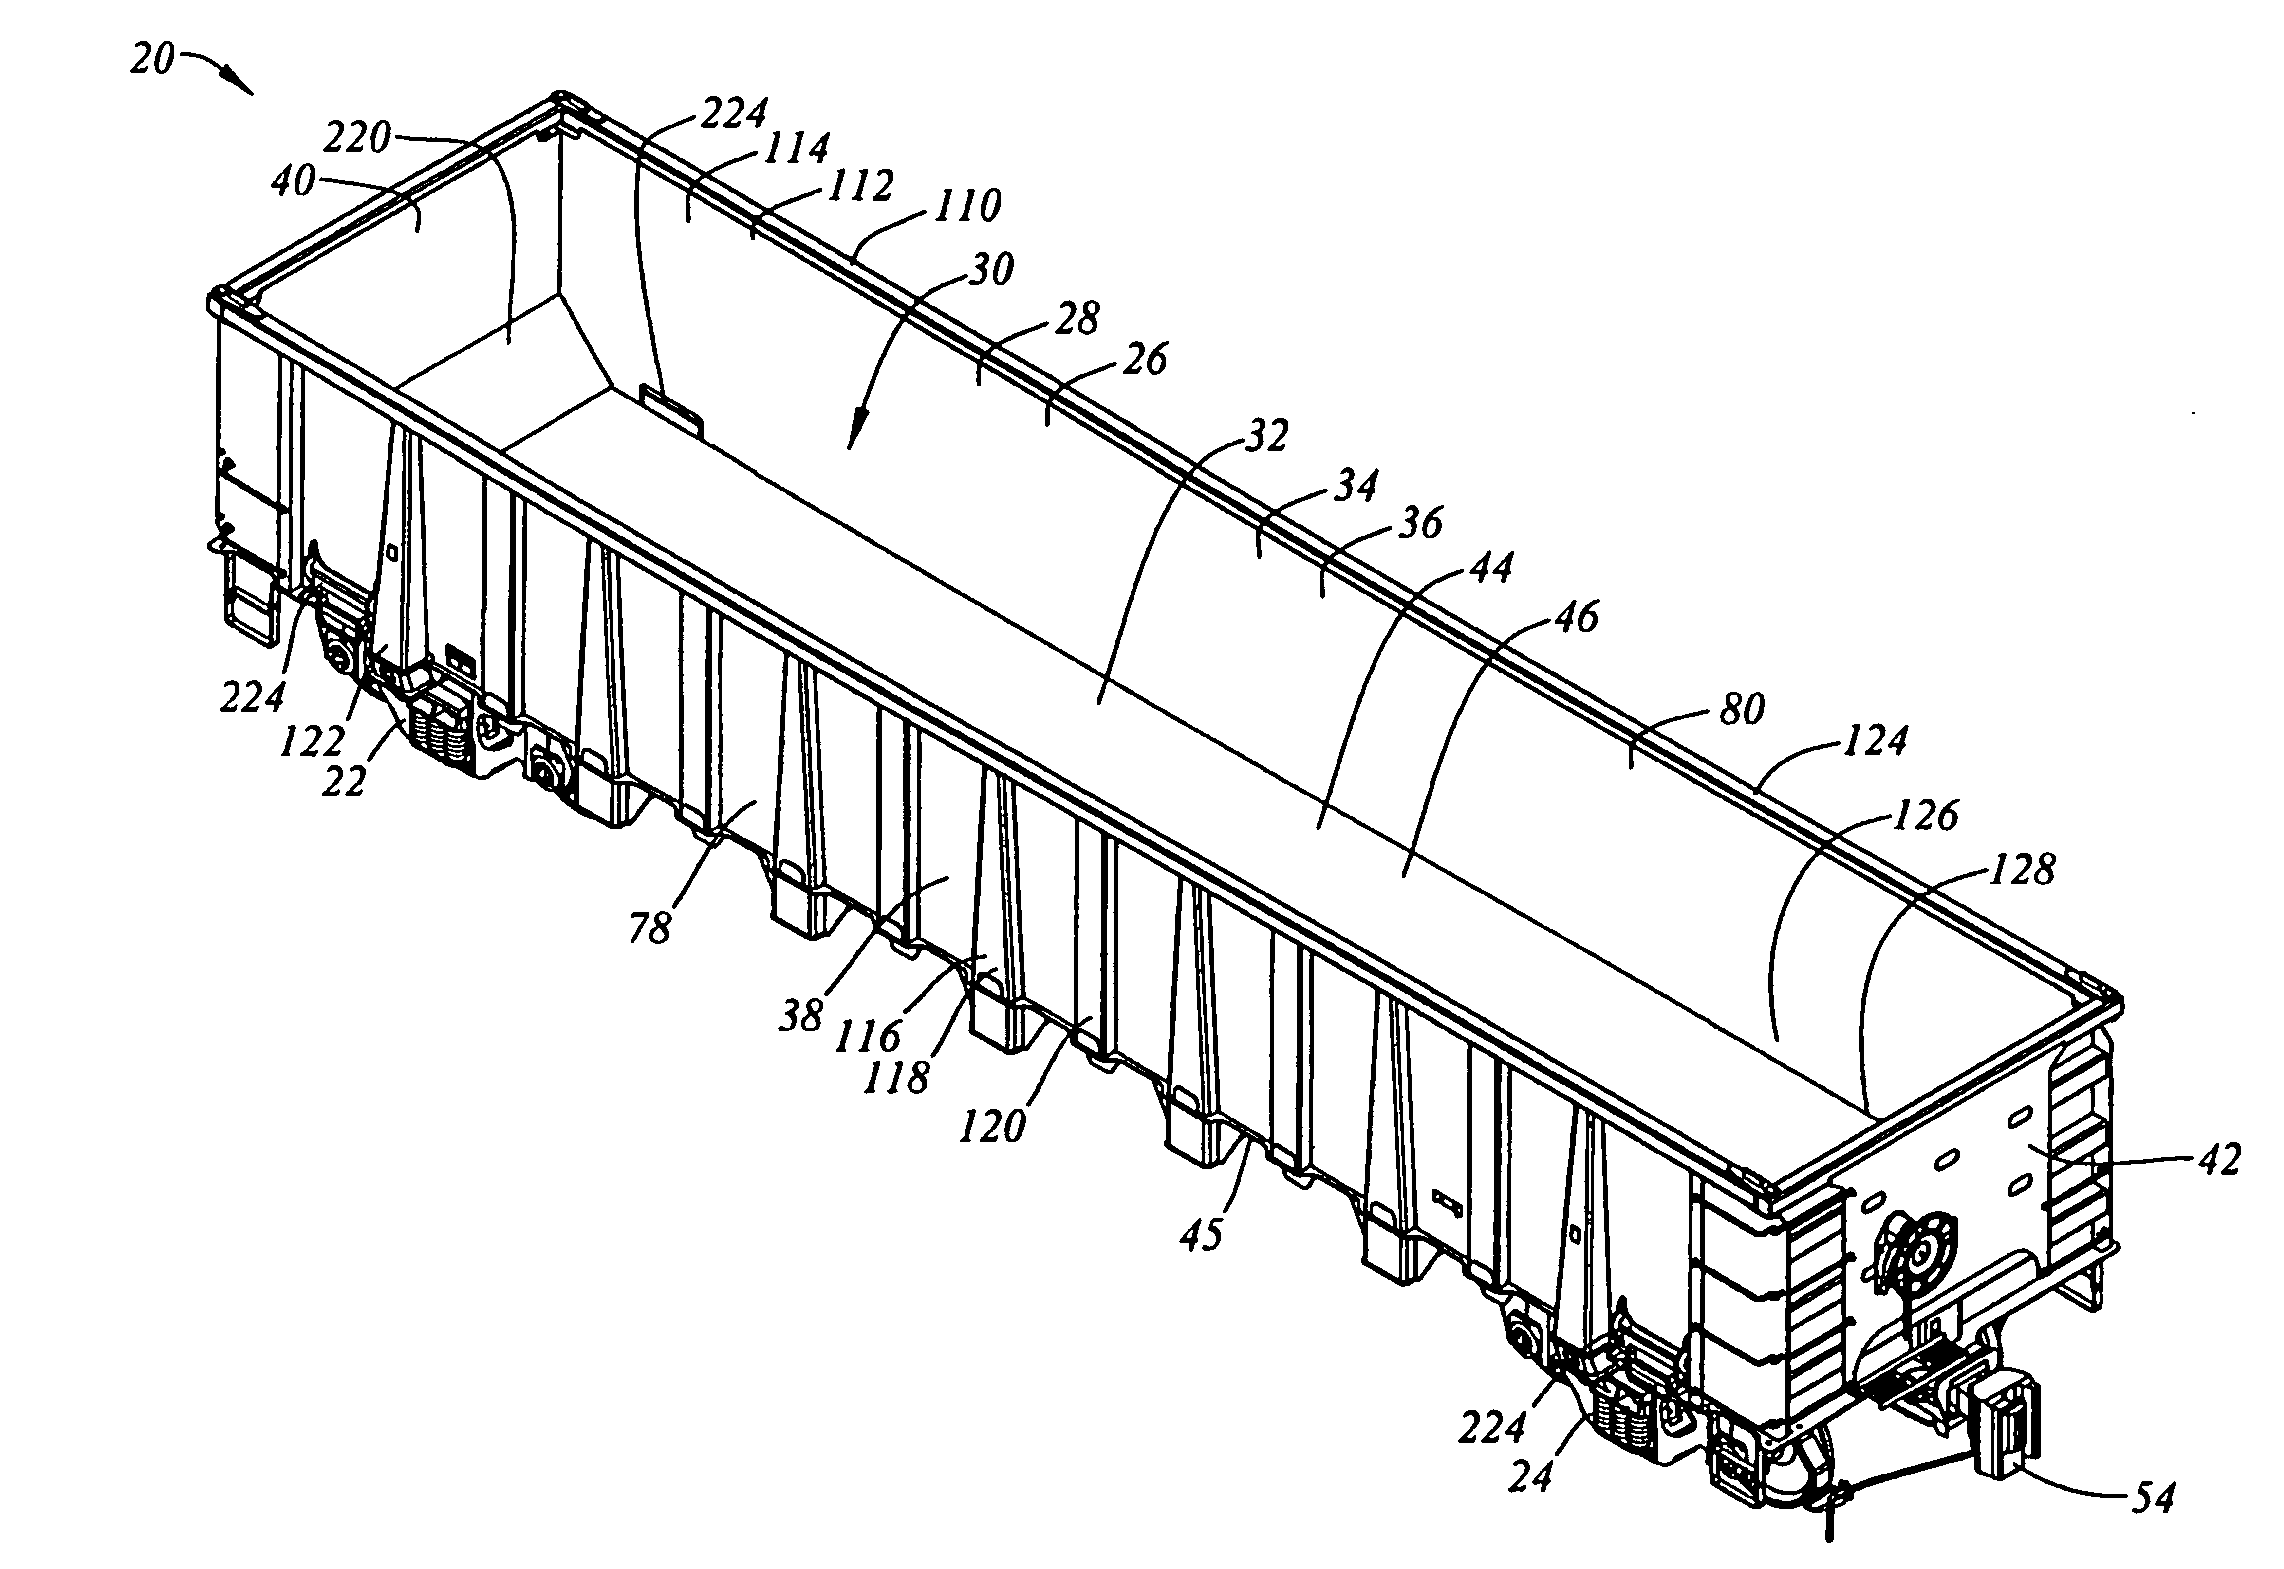 Rail road freight car structure